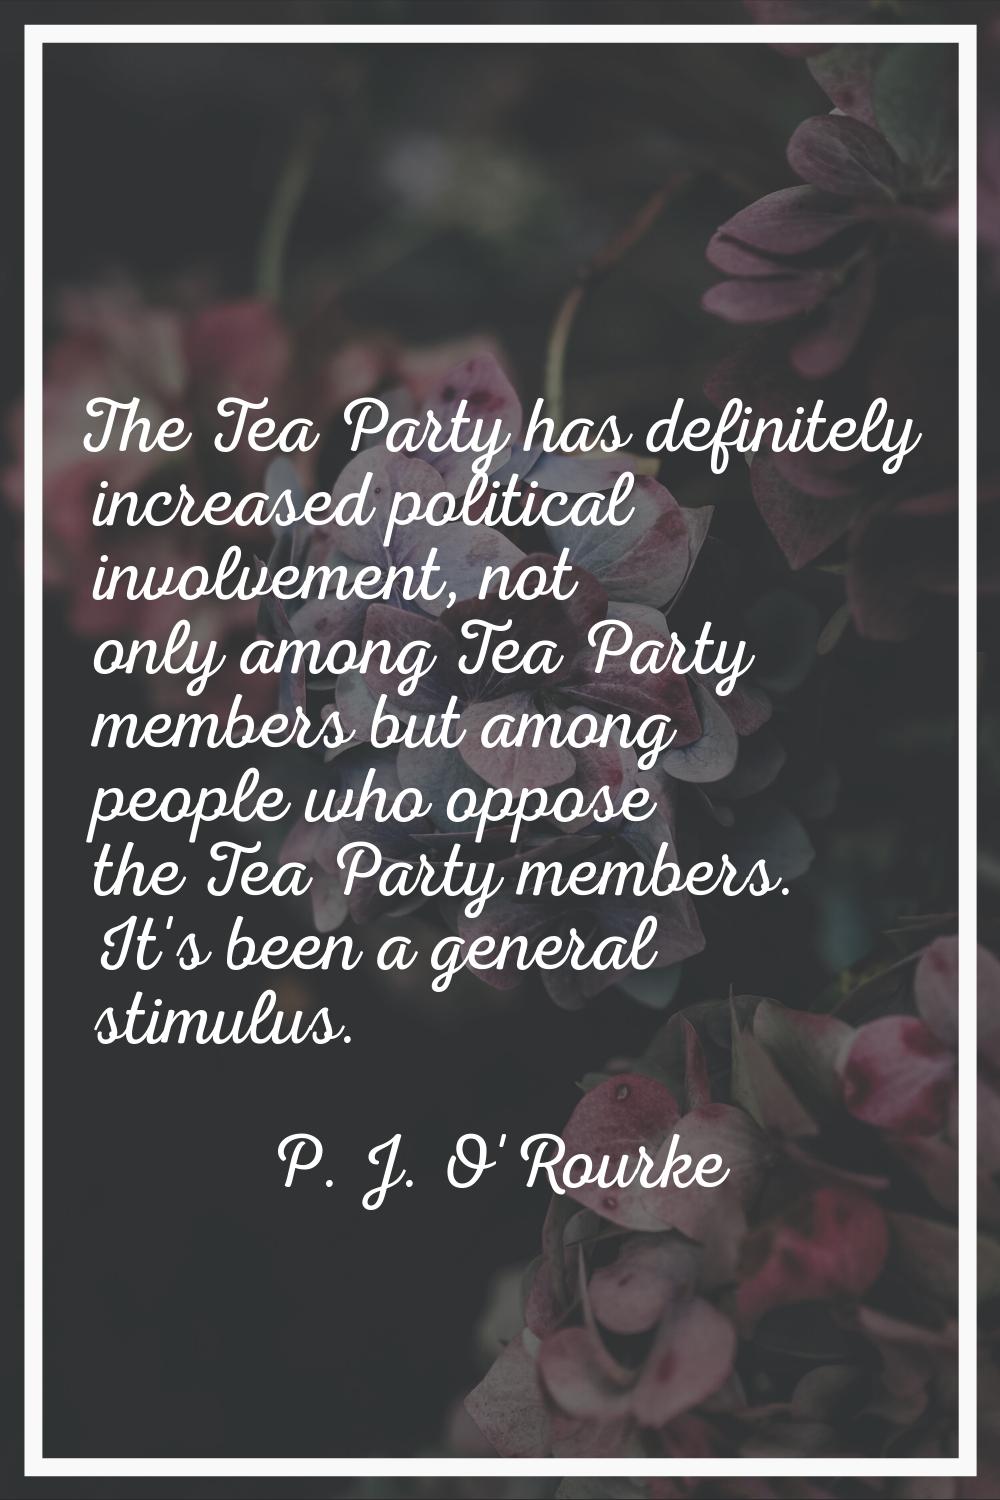 The Tea Party has definitely increased political involvement, not only among Tea Party members but 